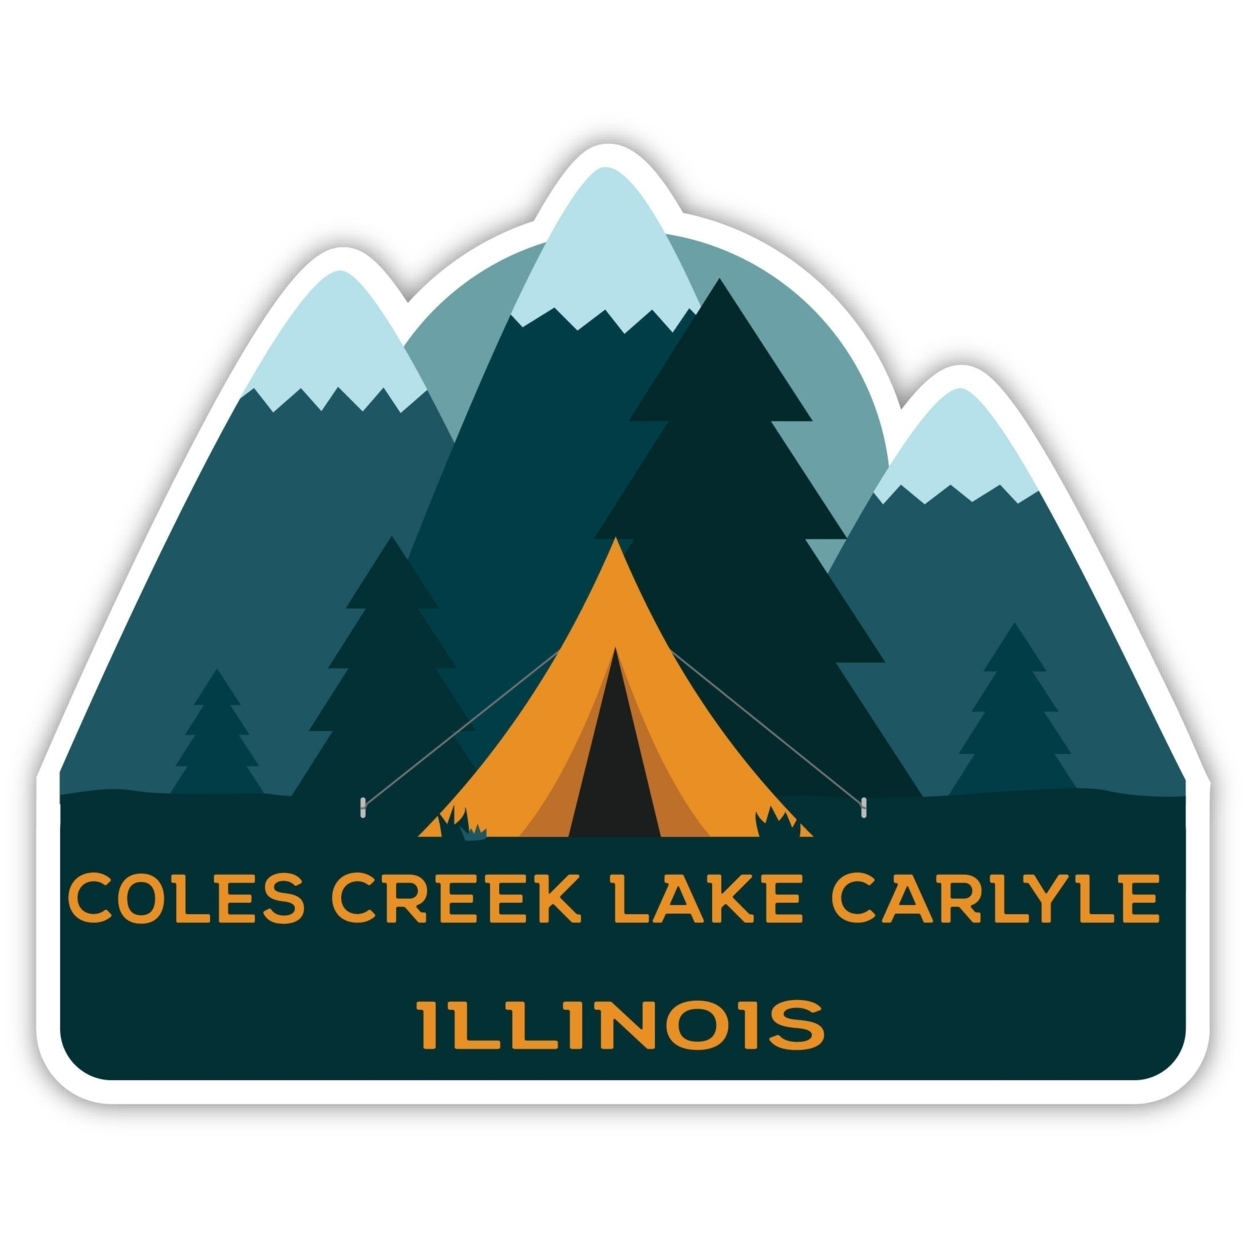 Coles Creek Lake Carlyle Illinois Souvenir Decorative Stickers (Choose Theme And Size) - 4-Pack, 6-Inch, Tent